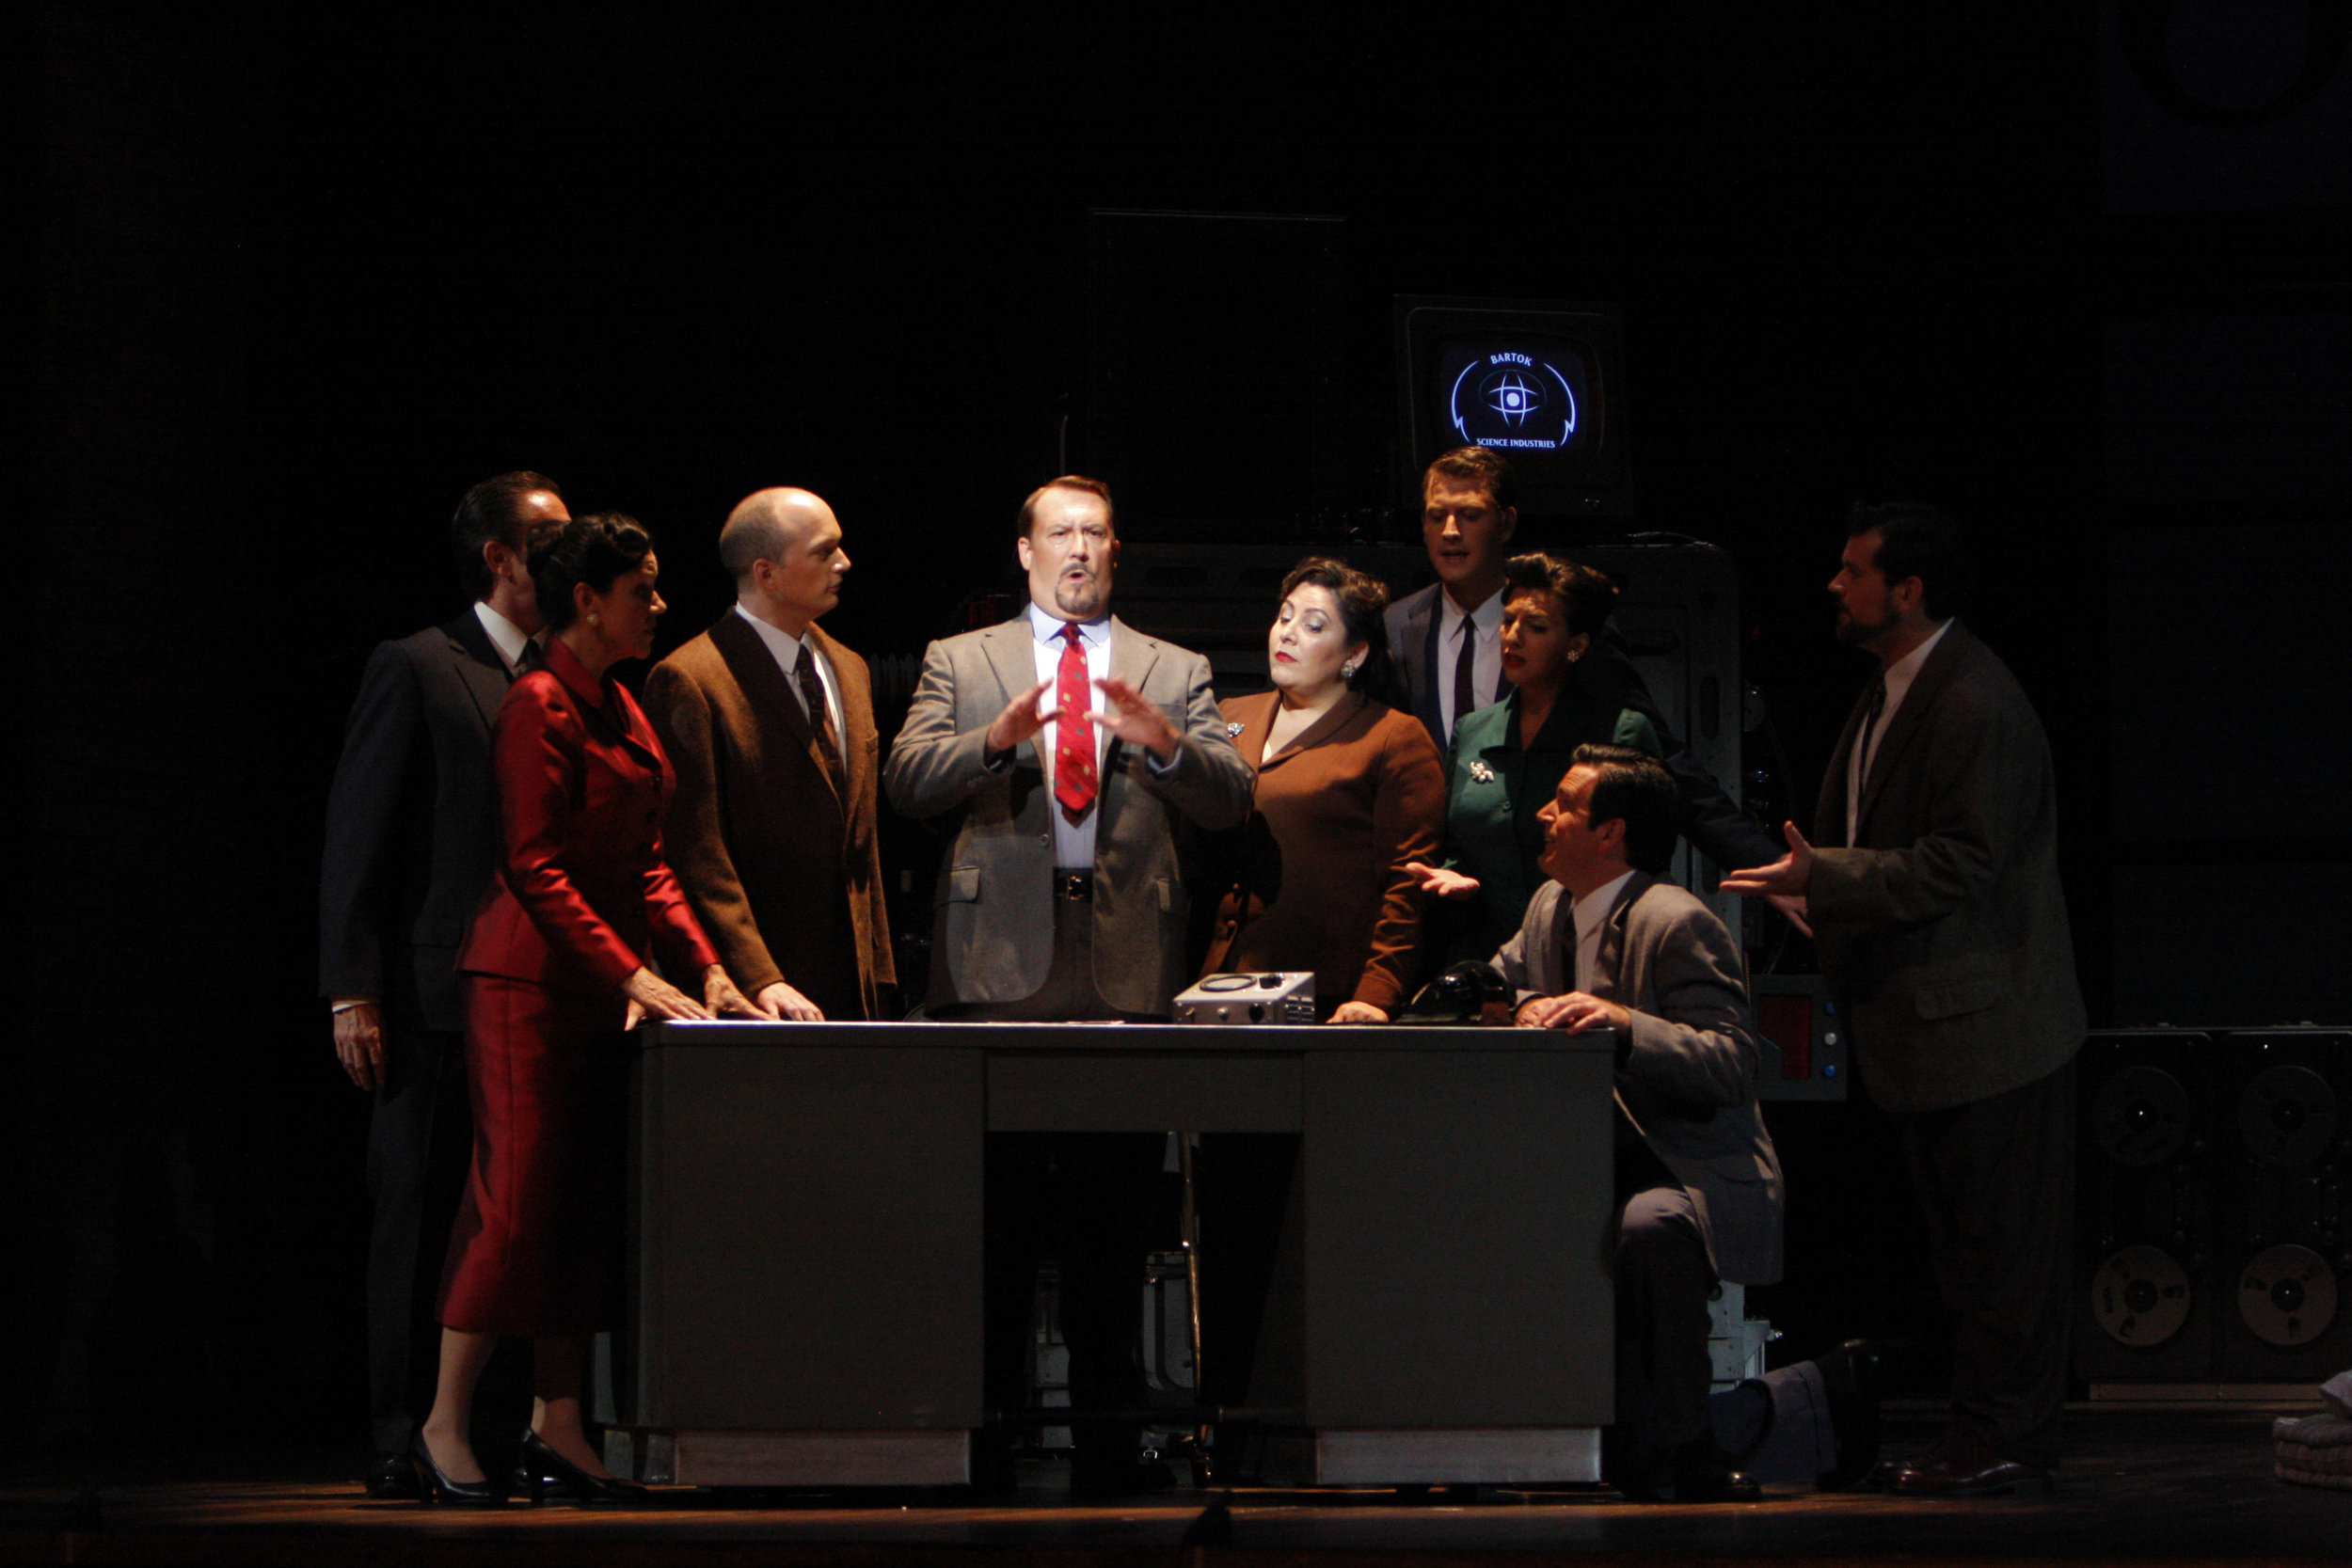 Gary Lehman (center) as Stathis Borans in The Fly. Photo by Robert Millard for the Los Angeles Opera, 2008